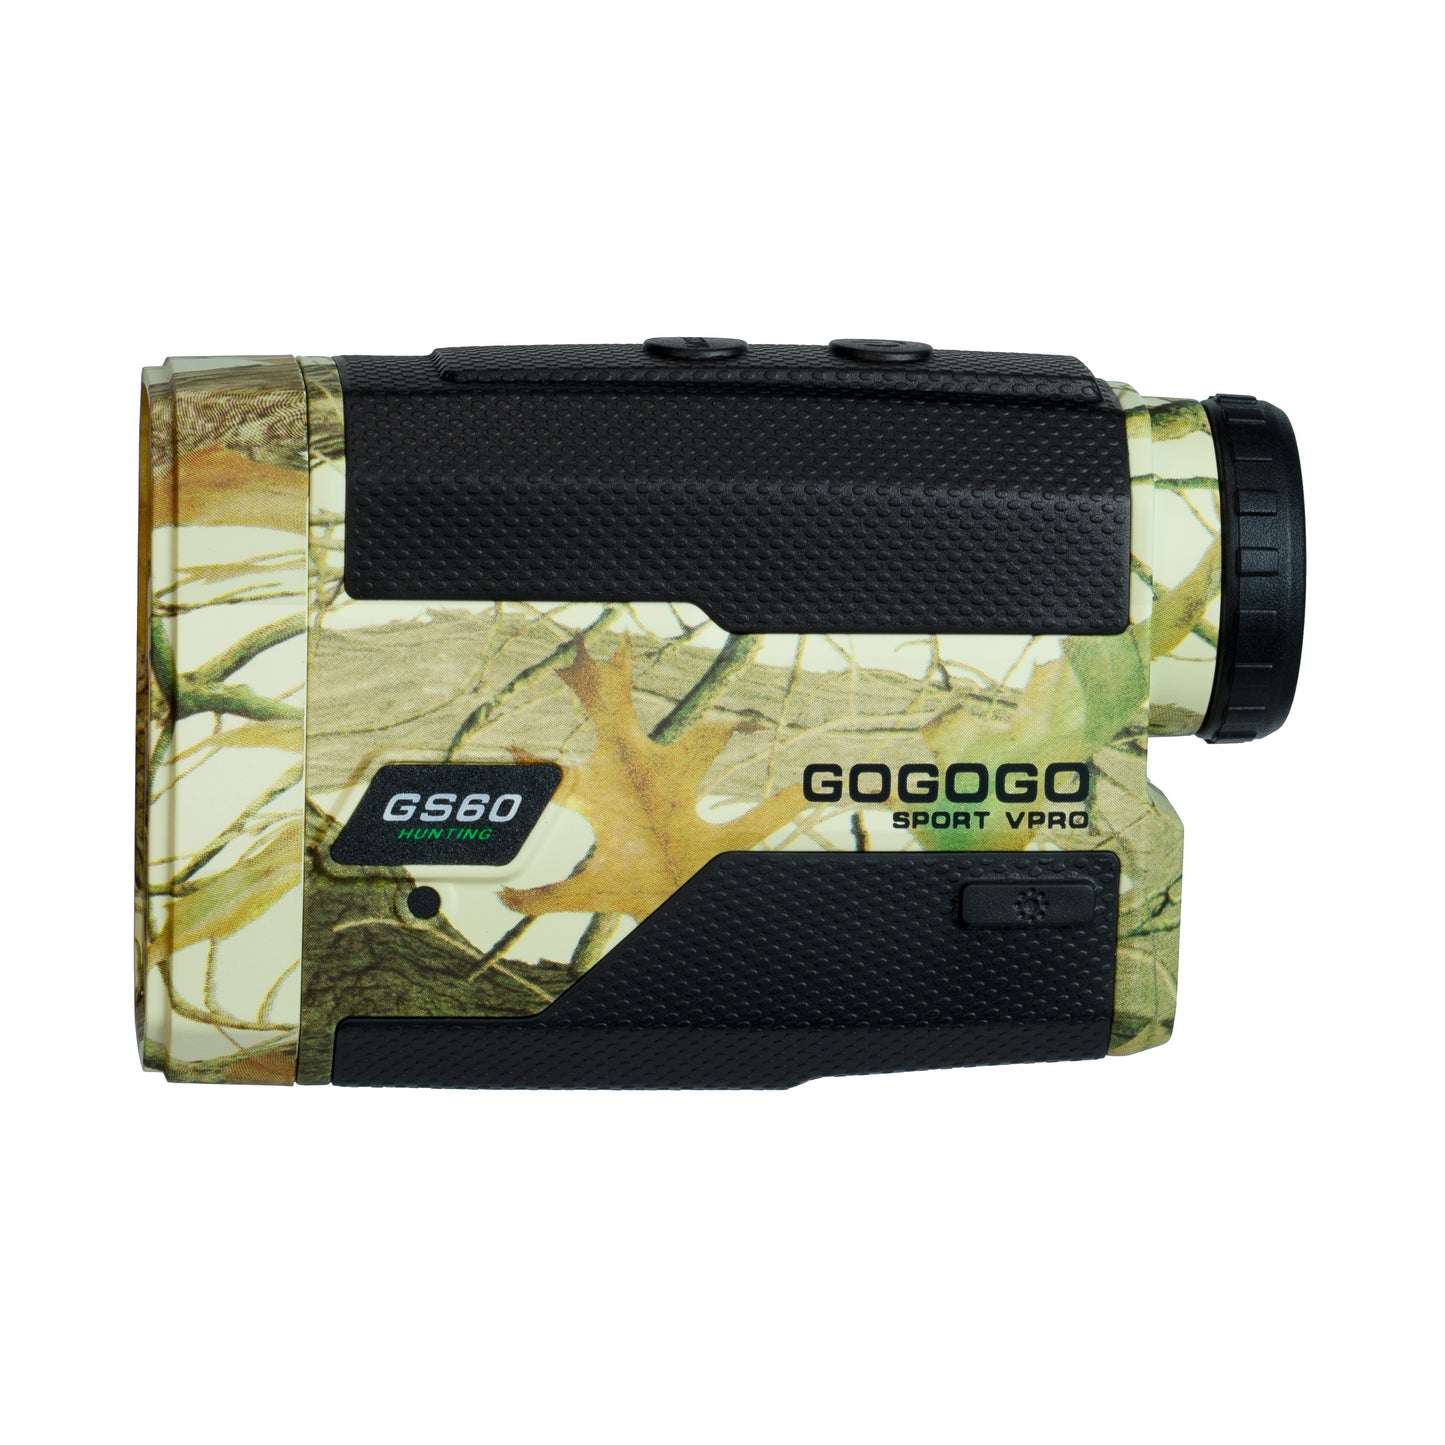 Gogogo Sport Vpro Rangefinder for Bow Hunting with Red LCD Display Horizontal Distance Calculator Rechargeable|GS60